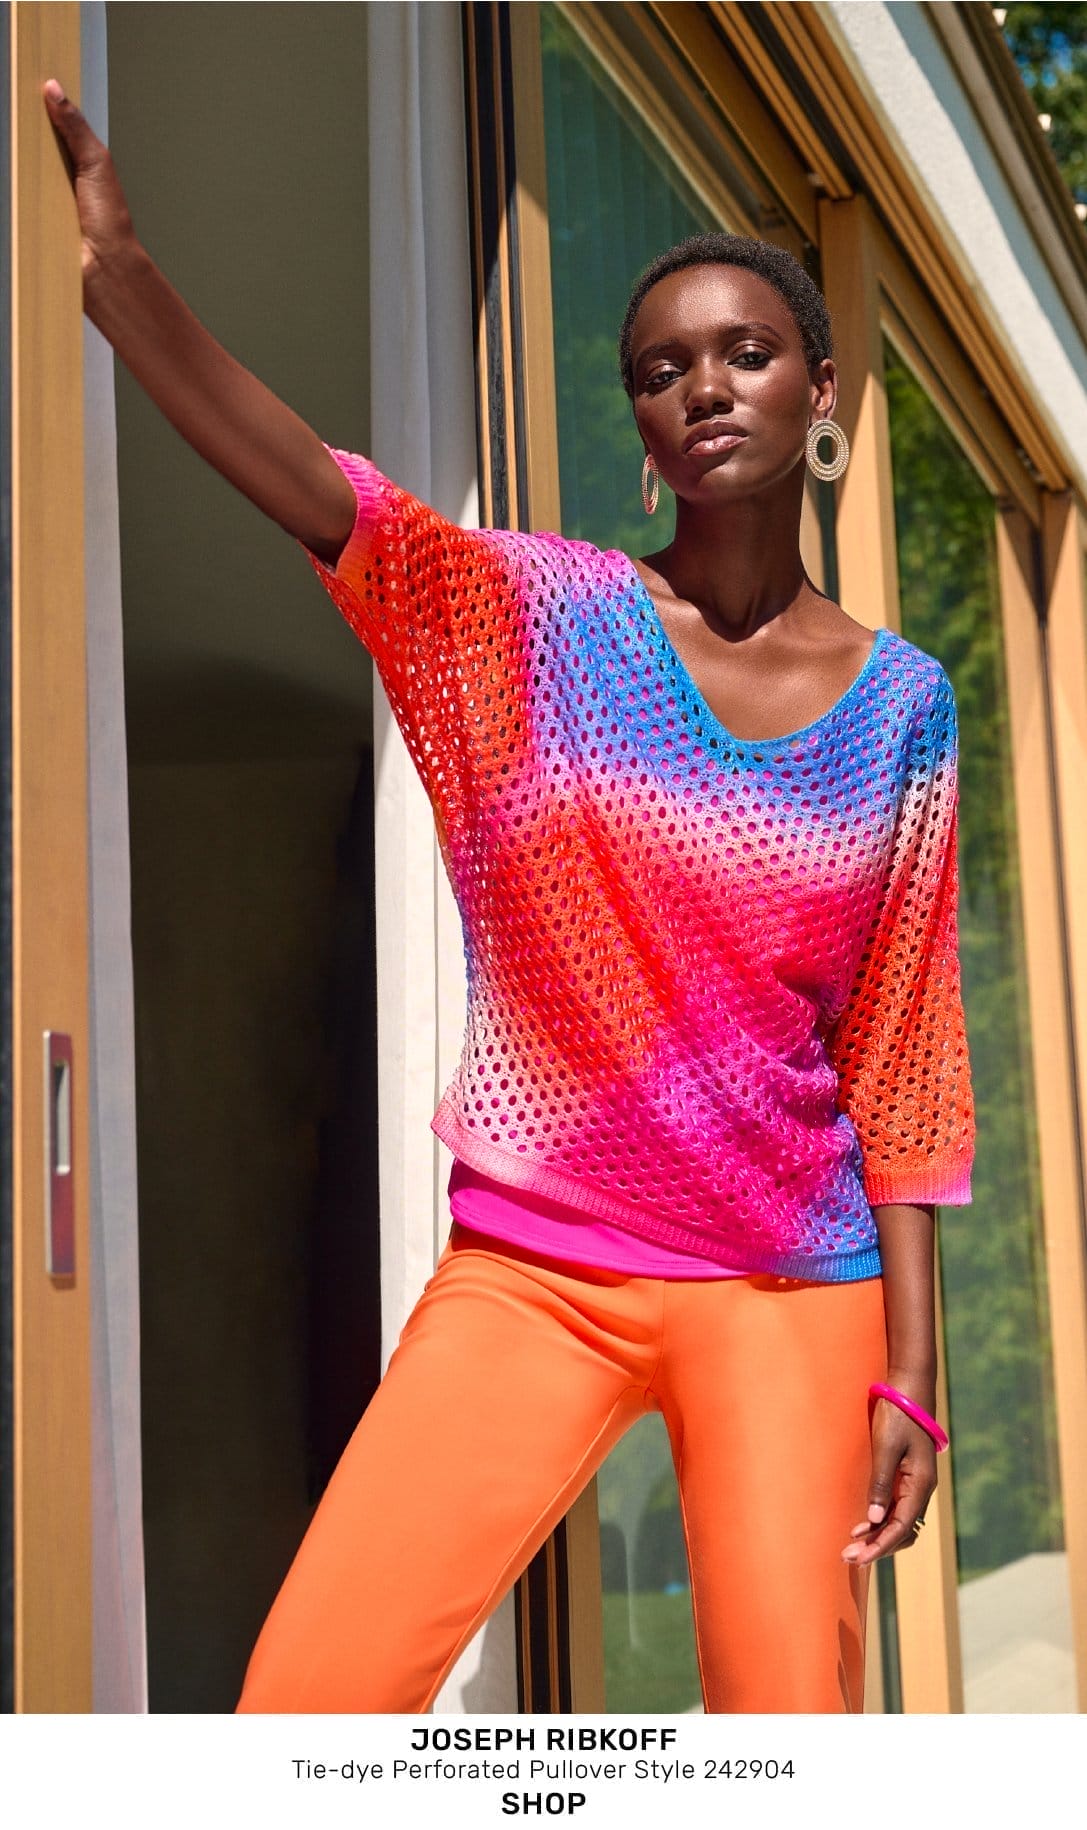 Tie-dye Perforated Pullover Style 242904